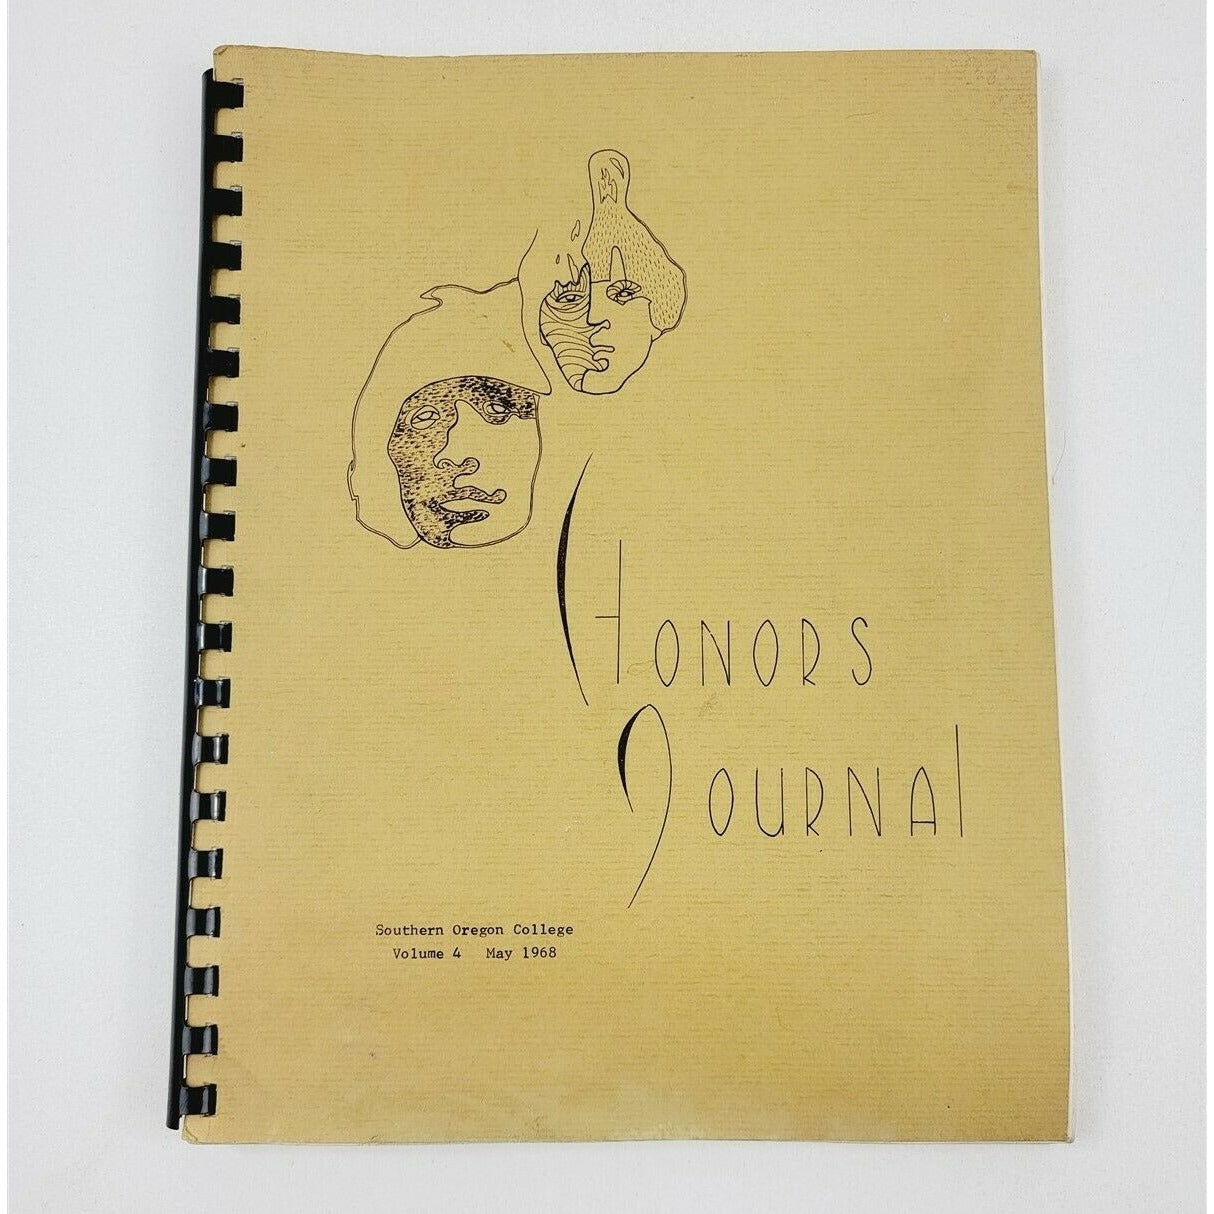 1968 Southern Oregon College Honors Journal Volume 4 May Ashland OR